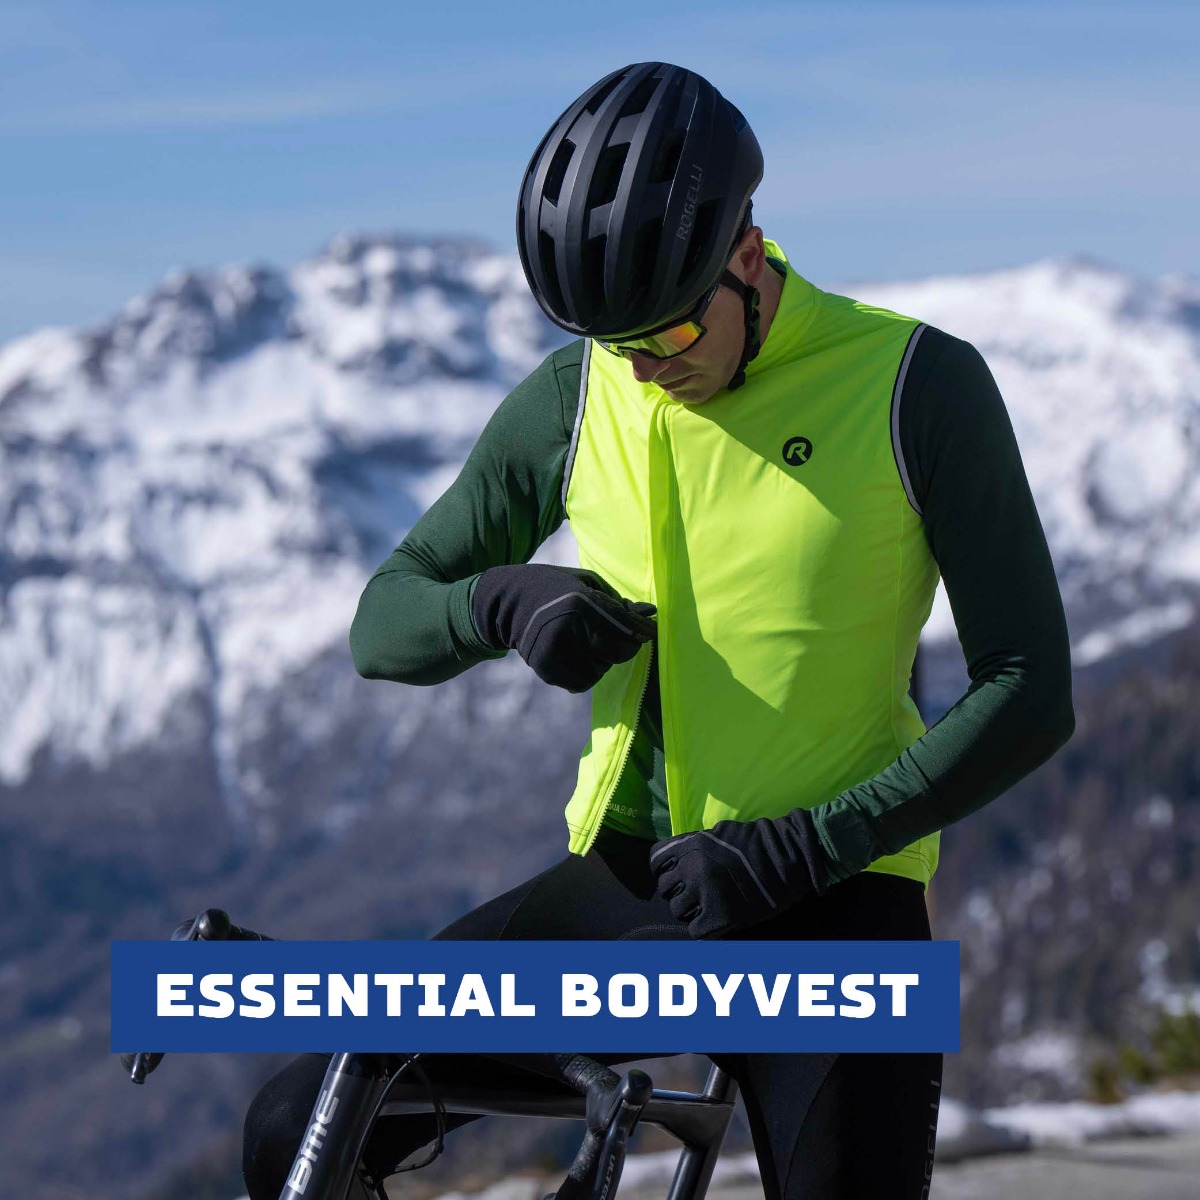 Cyclist zips up his Rogelli body vest with an asymmetric two-way zipper for a perfect fit over the Essential long-sleeve cycling shirt